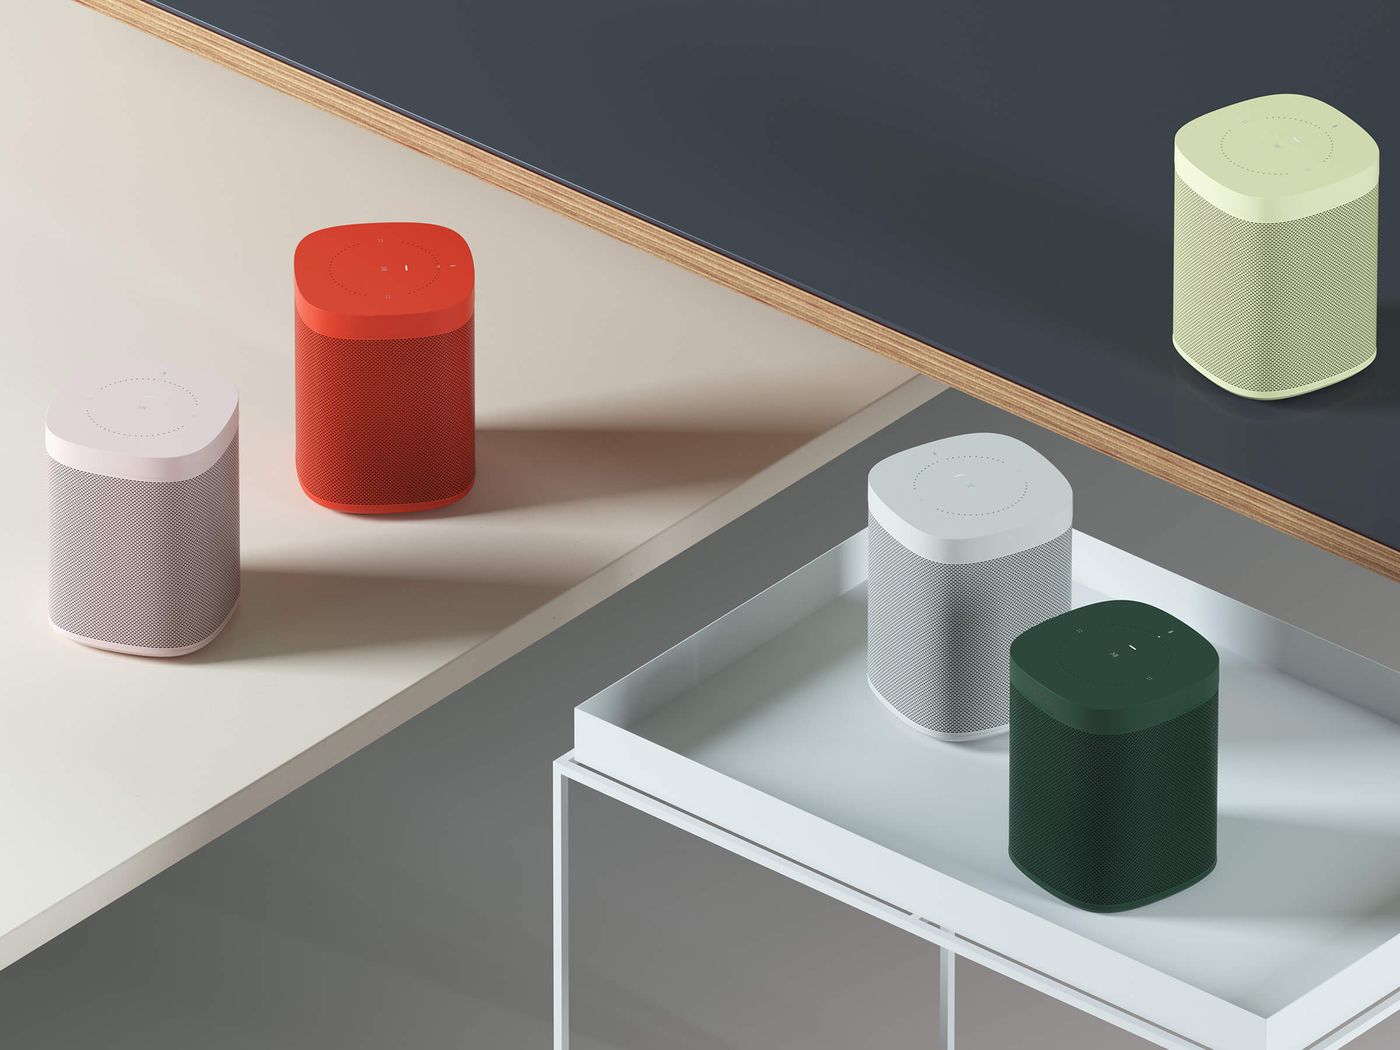 Sonos coming in new, more expensive colors - The Verge